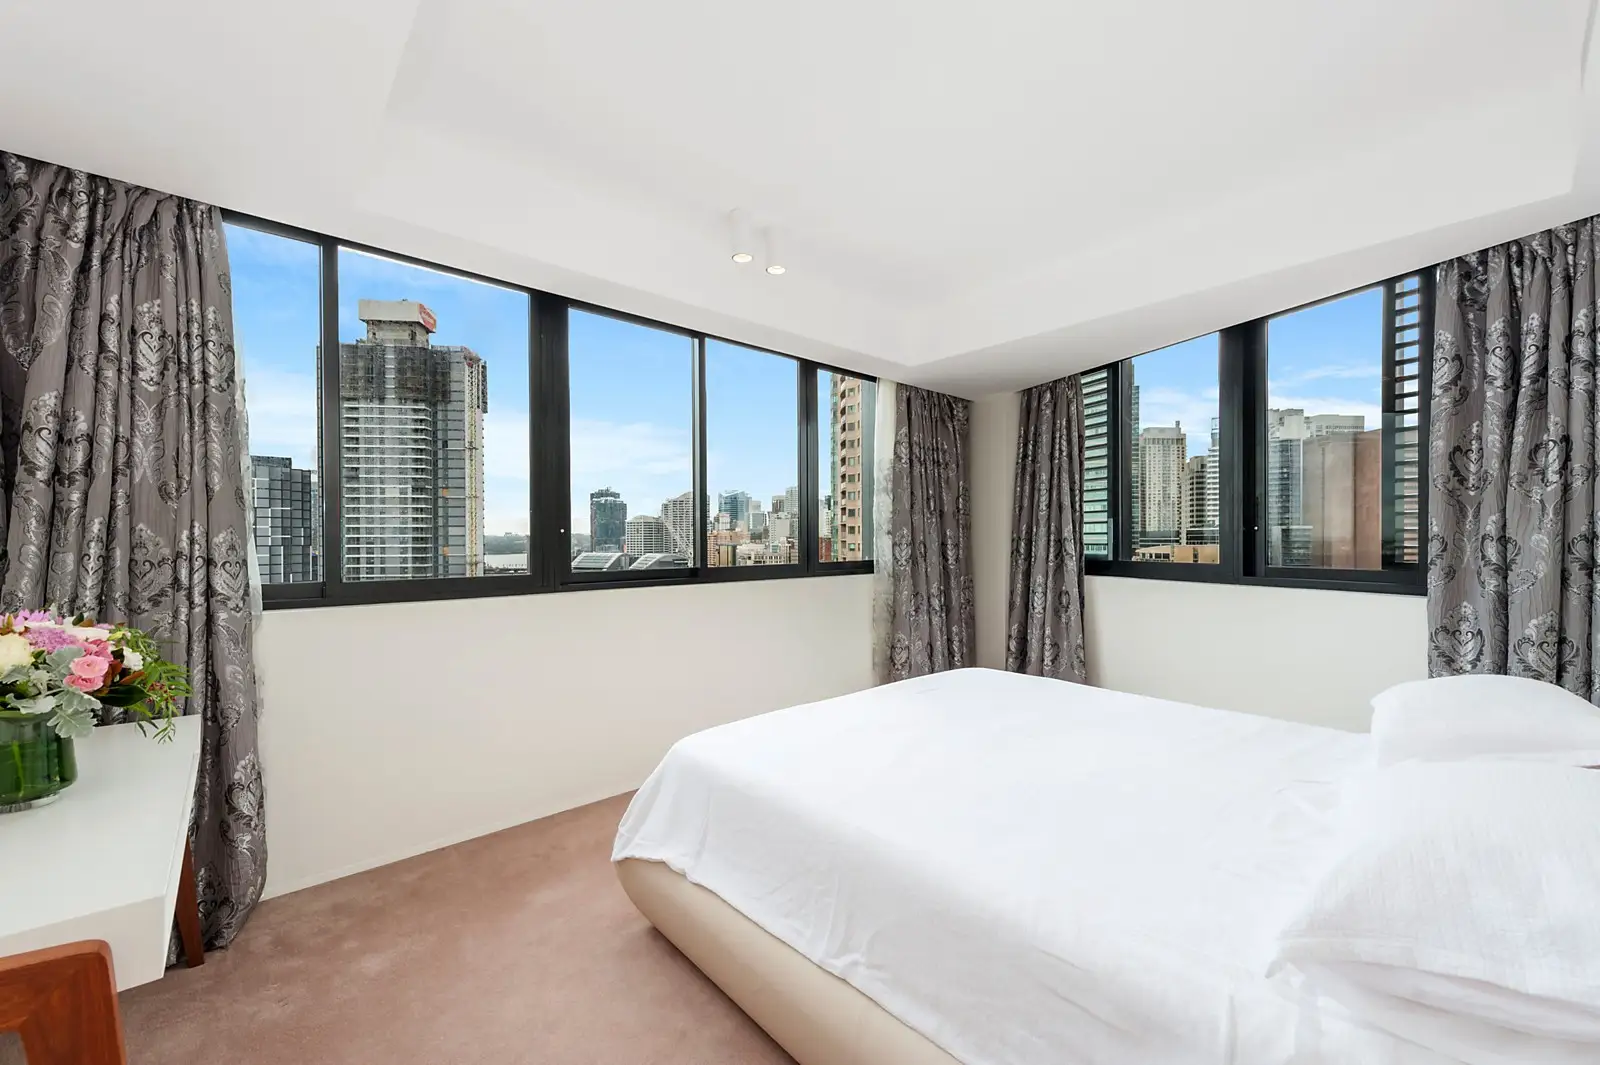 Photo #3: N18.03/33 Ultimo Road, Haymarket - Sold by Sydney Sotheby's International Realty